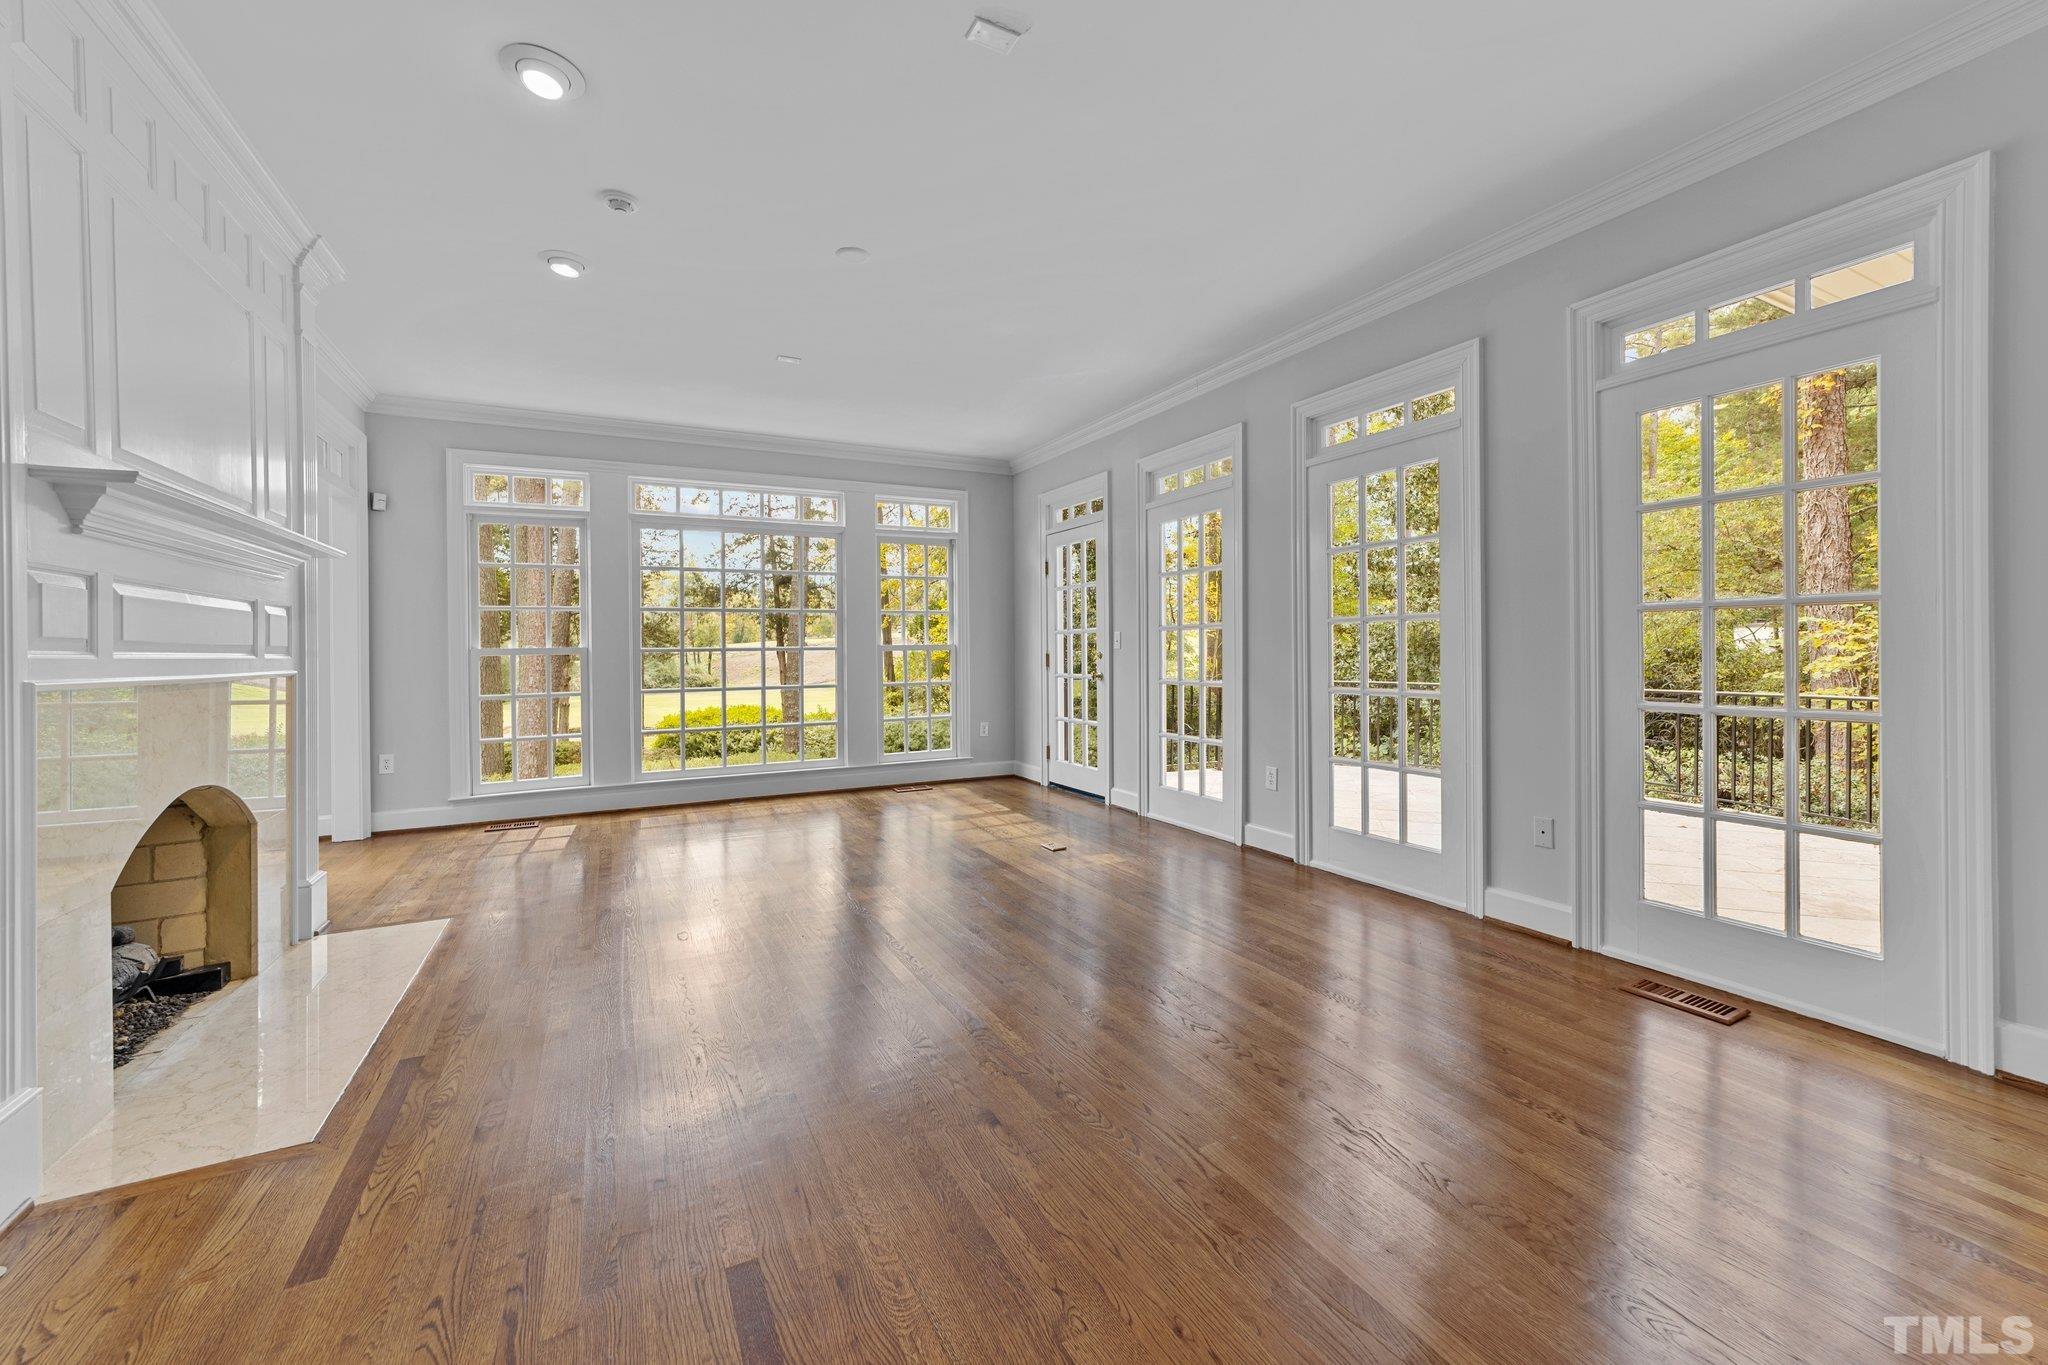 Gleaming oak floors, a very lovely marble fireplace and beautiful vistas make this everyone's favorite room.